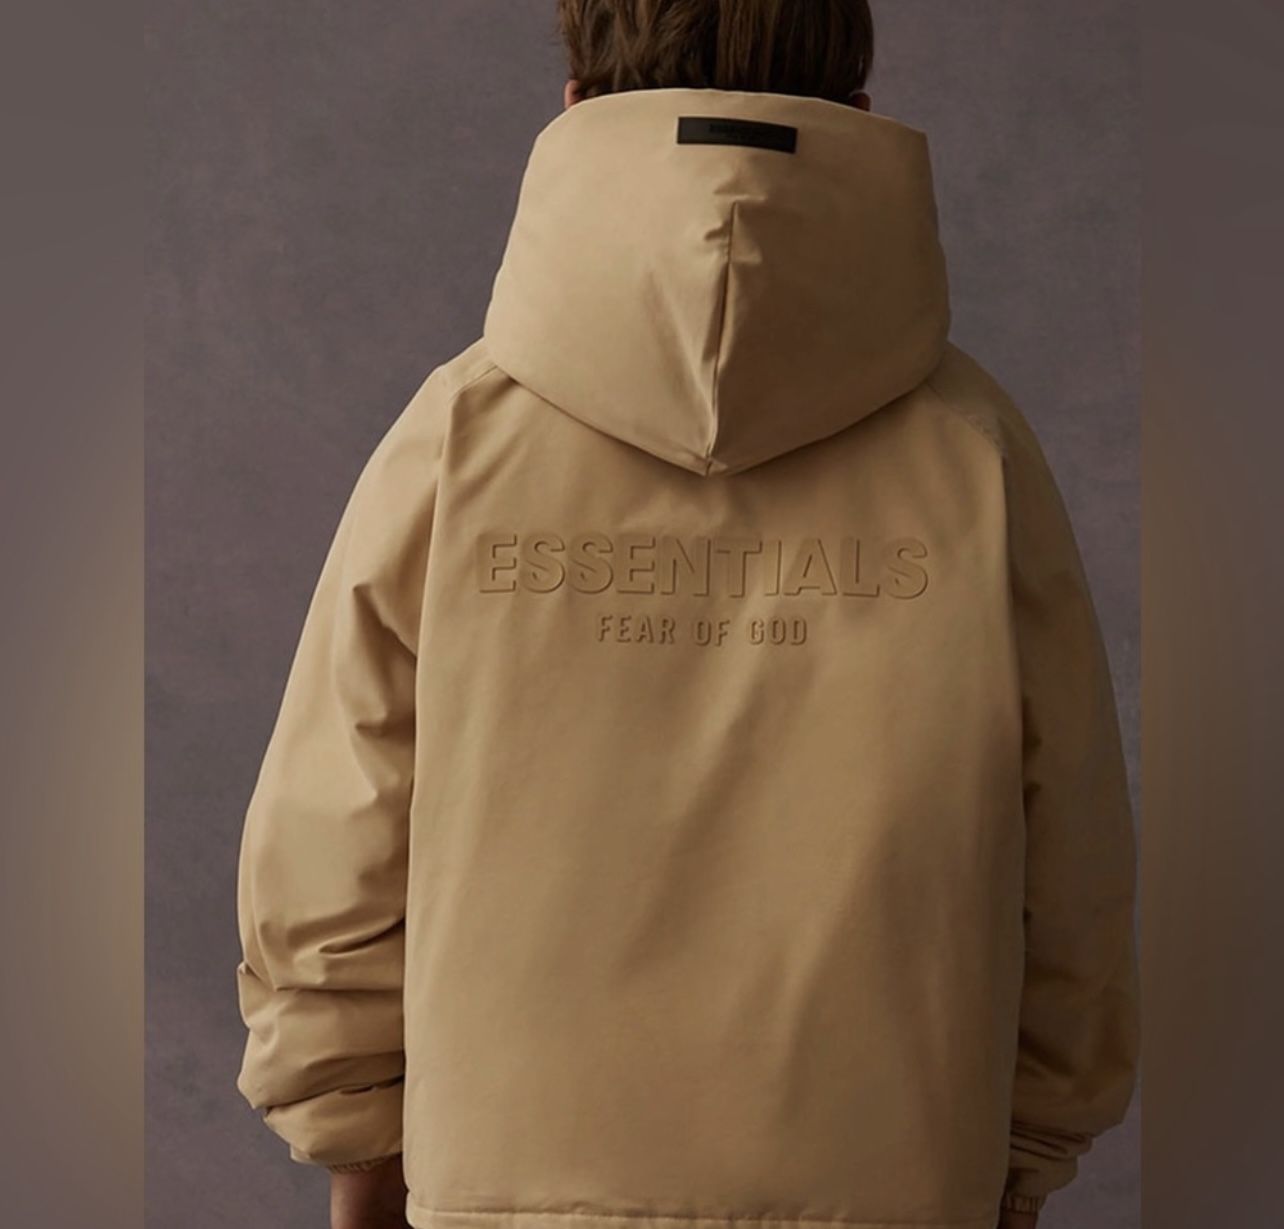 KIDS ESSENTIALS FEAR OF GOD HOODIE JACKET COLOR SAND NWT! SIZE 8